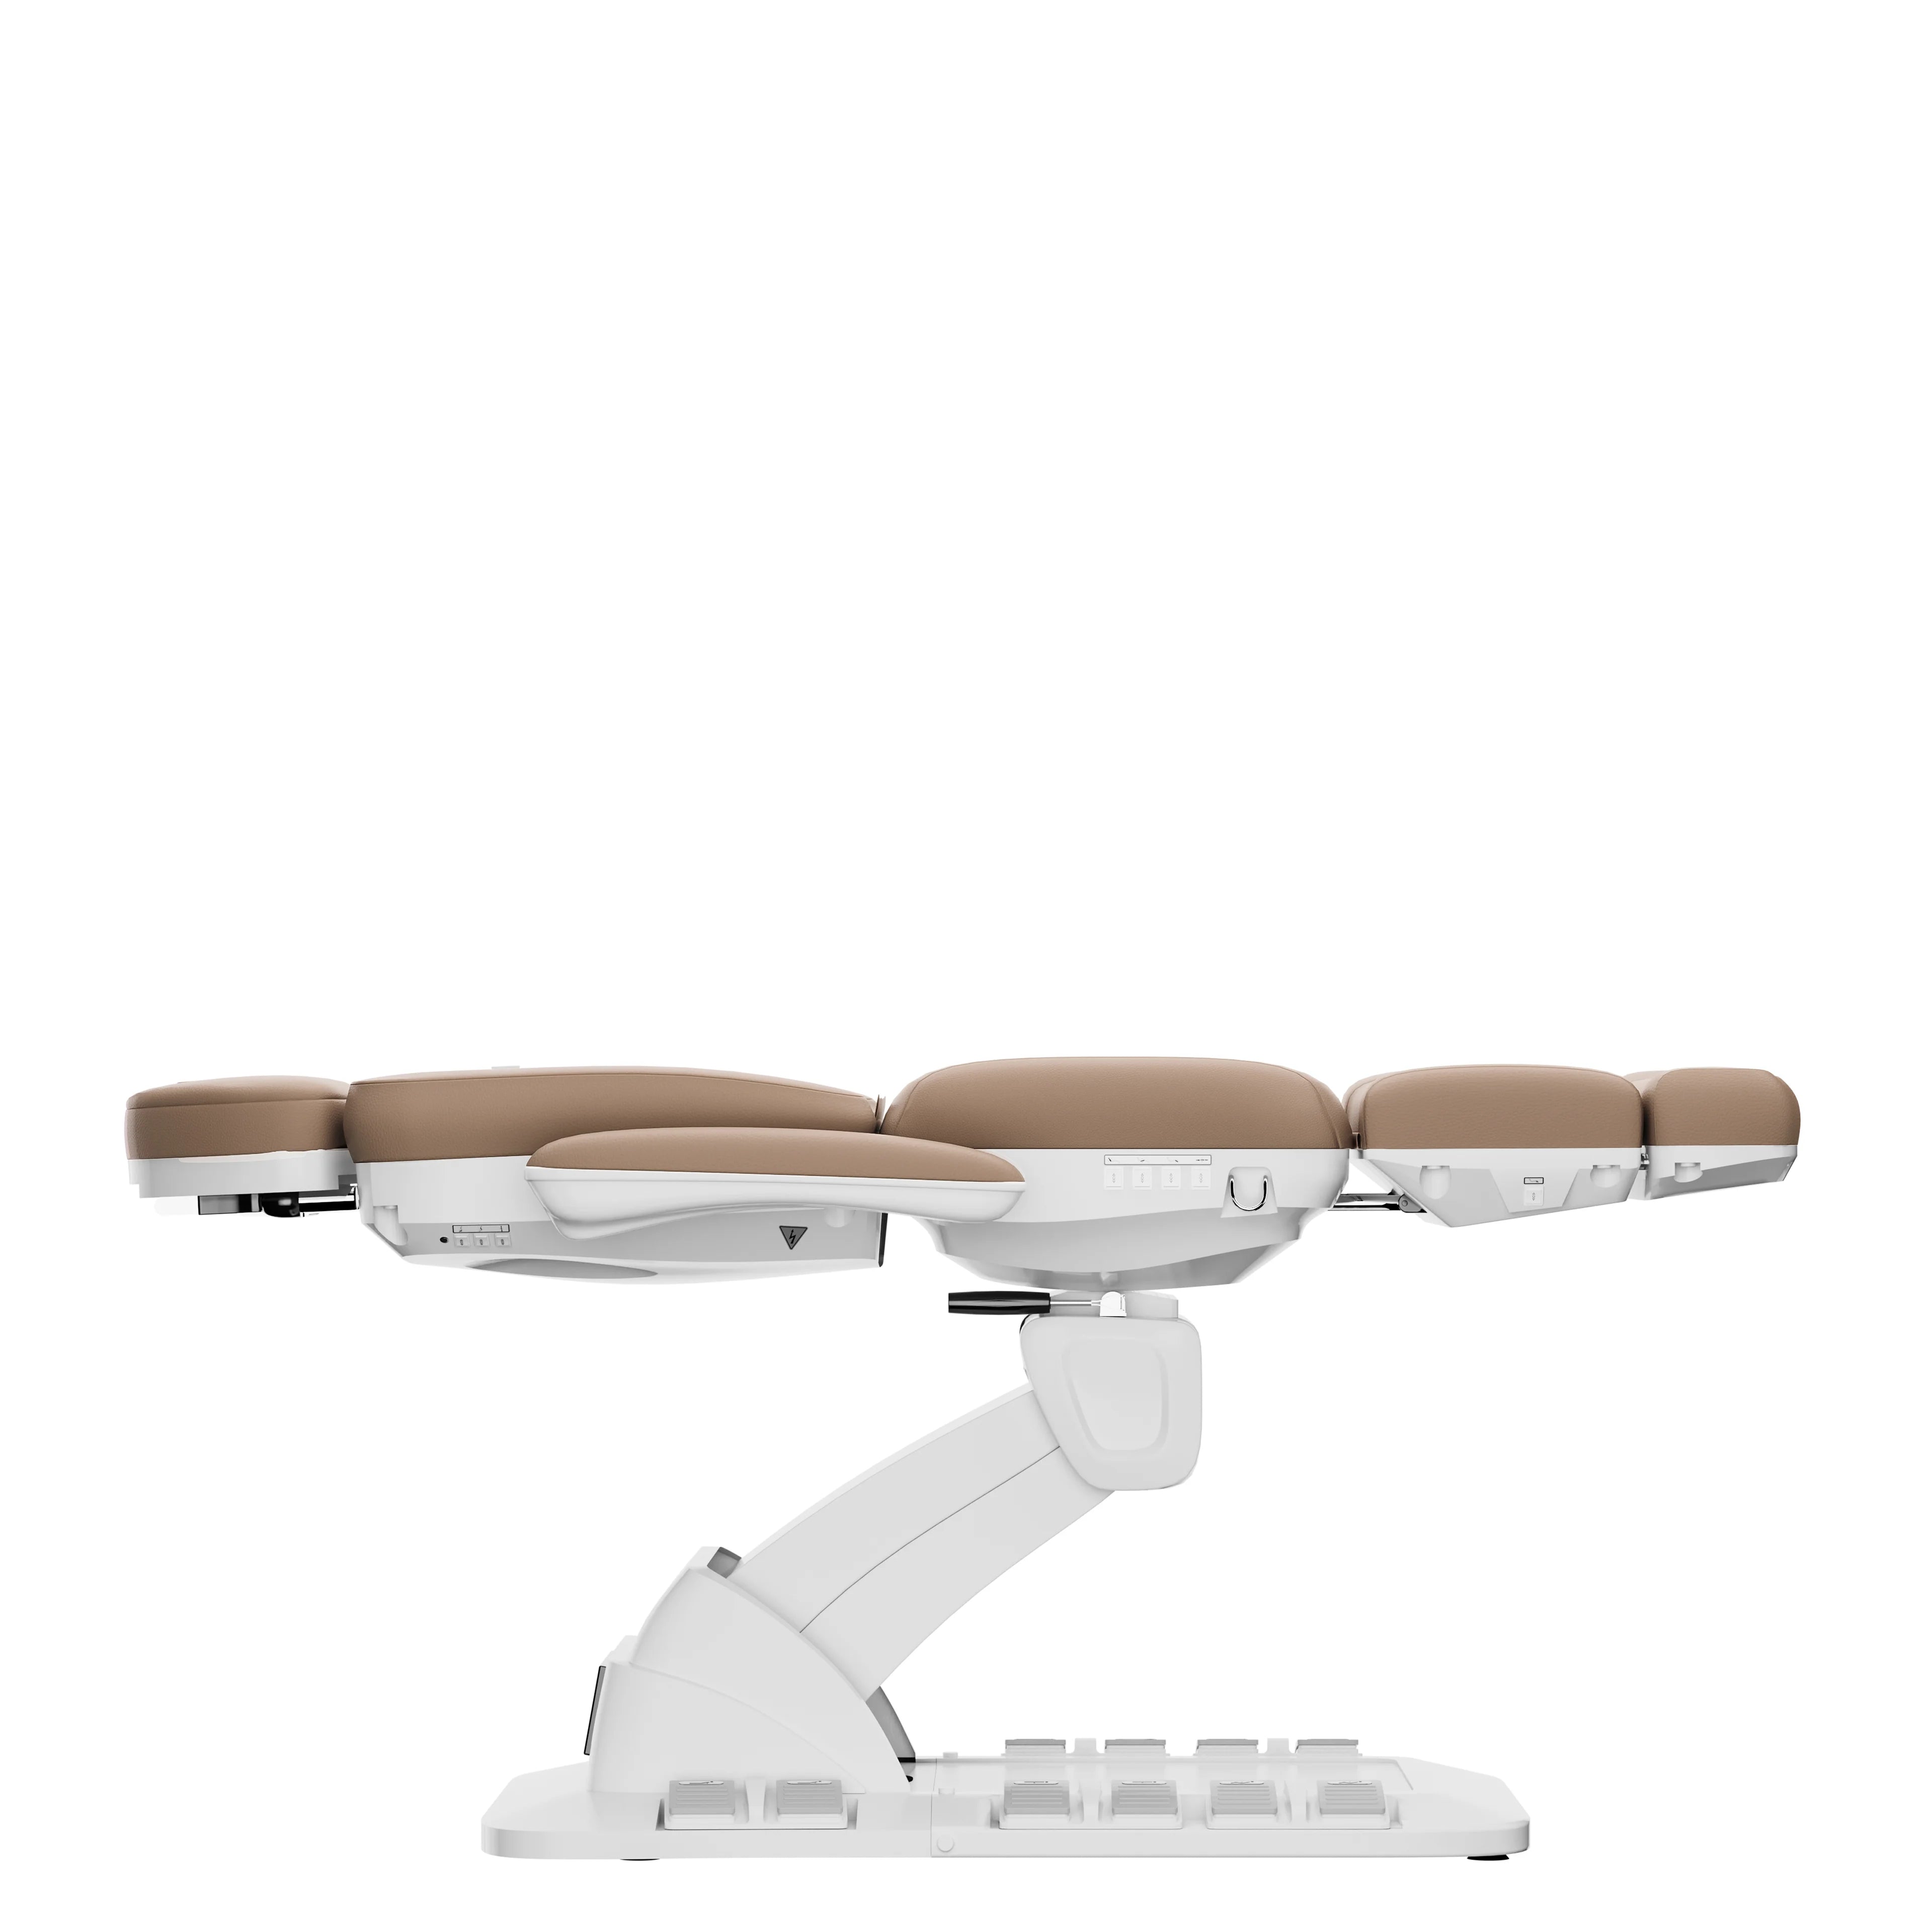 SpaMarc . Novato (Brown) . Rotating . 4 Motor Spa Treatment Chair/Bed